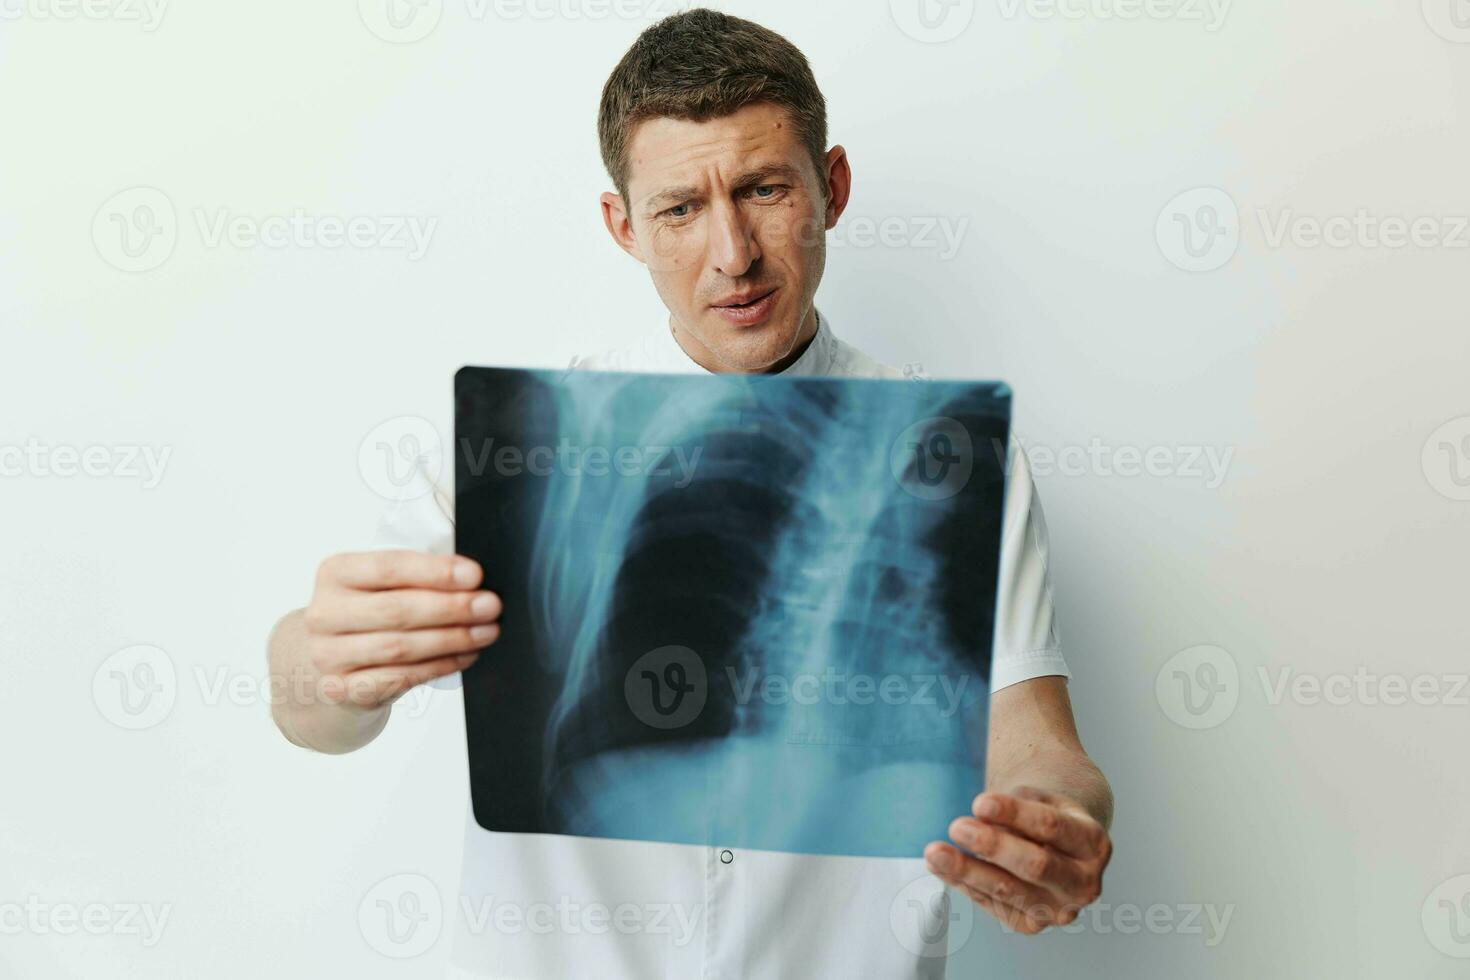 Man care surgeon scan disease patient x-ray chest stethoscope clinical specialist hospital exam photo